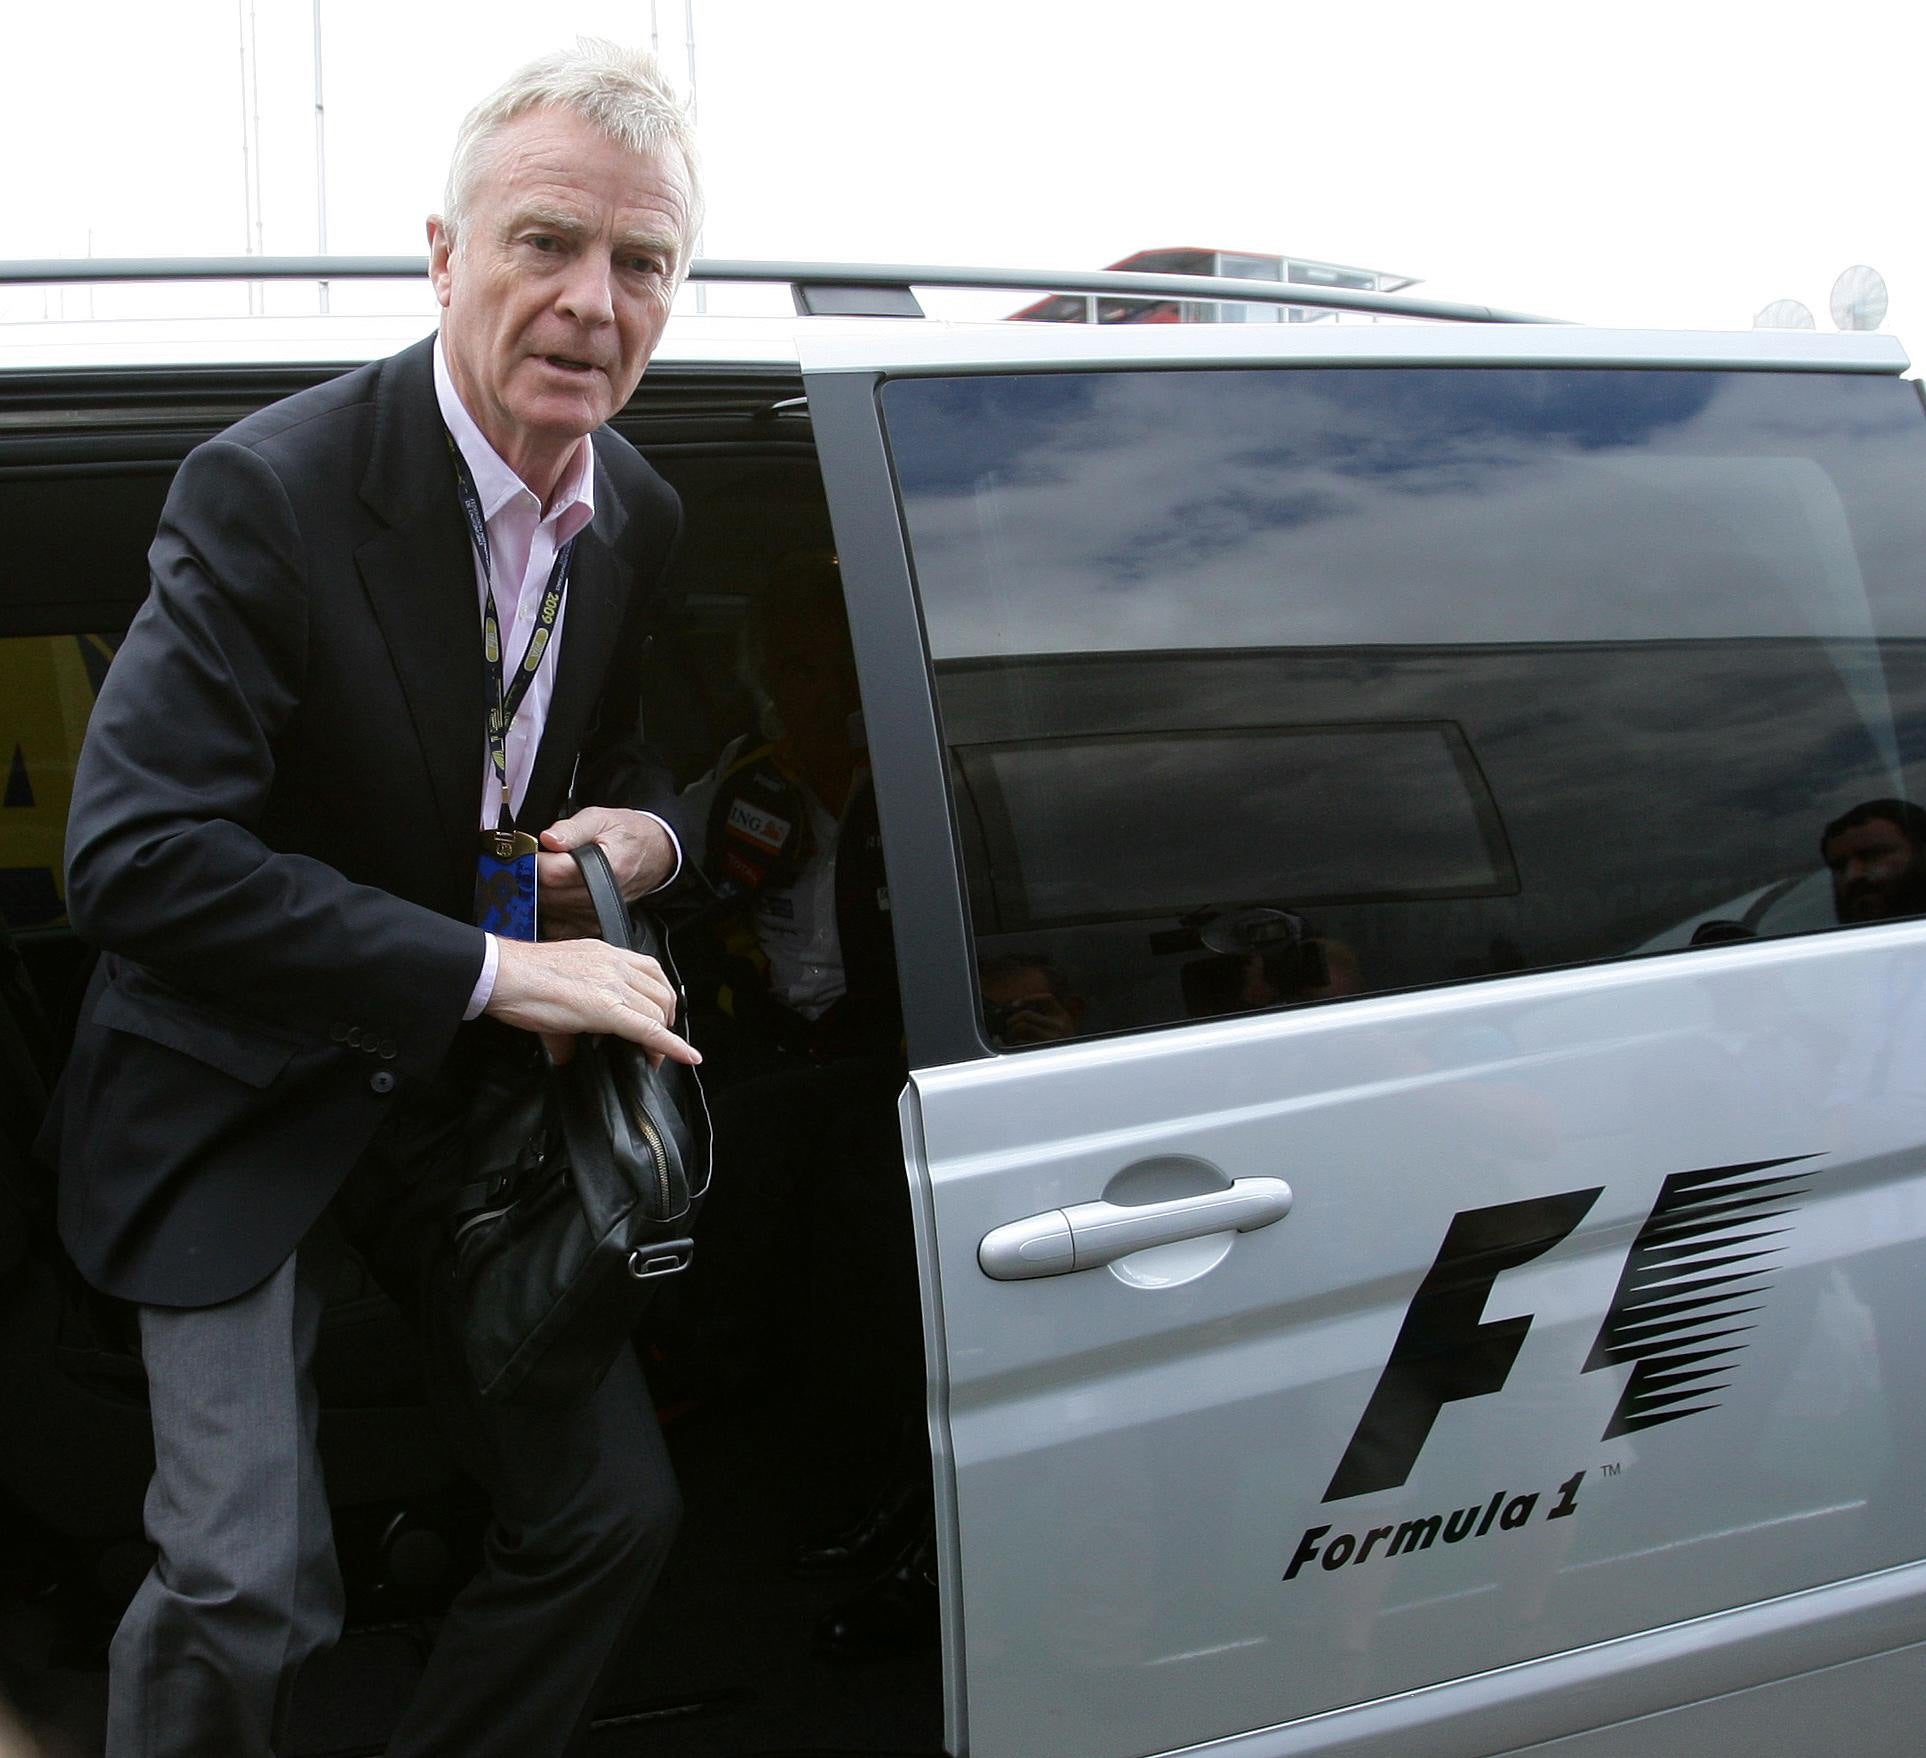 Max Mosley seen arriving in the paddock before the British Grand Prix at Silverstone, Northamptonshire (Martin Rickett/PA)